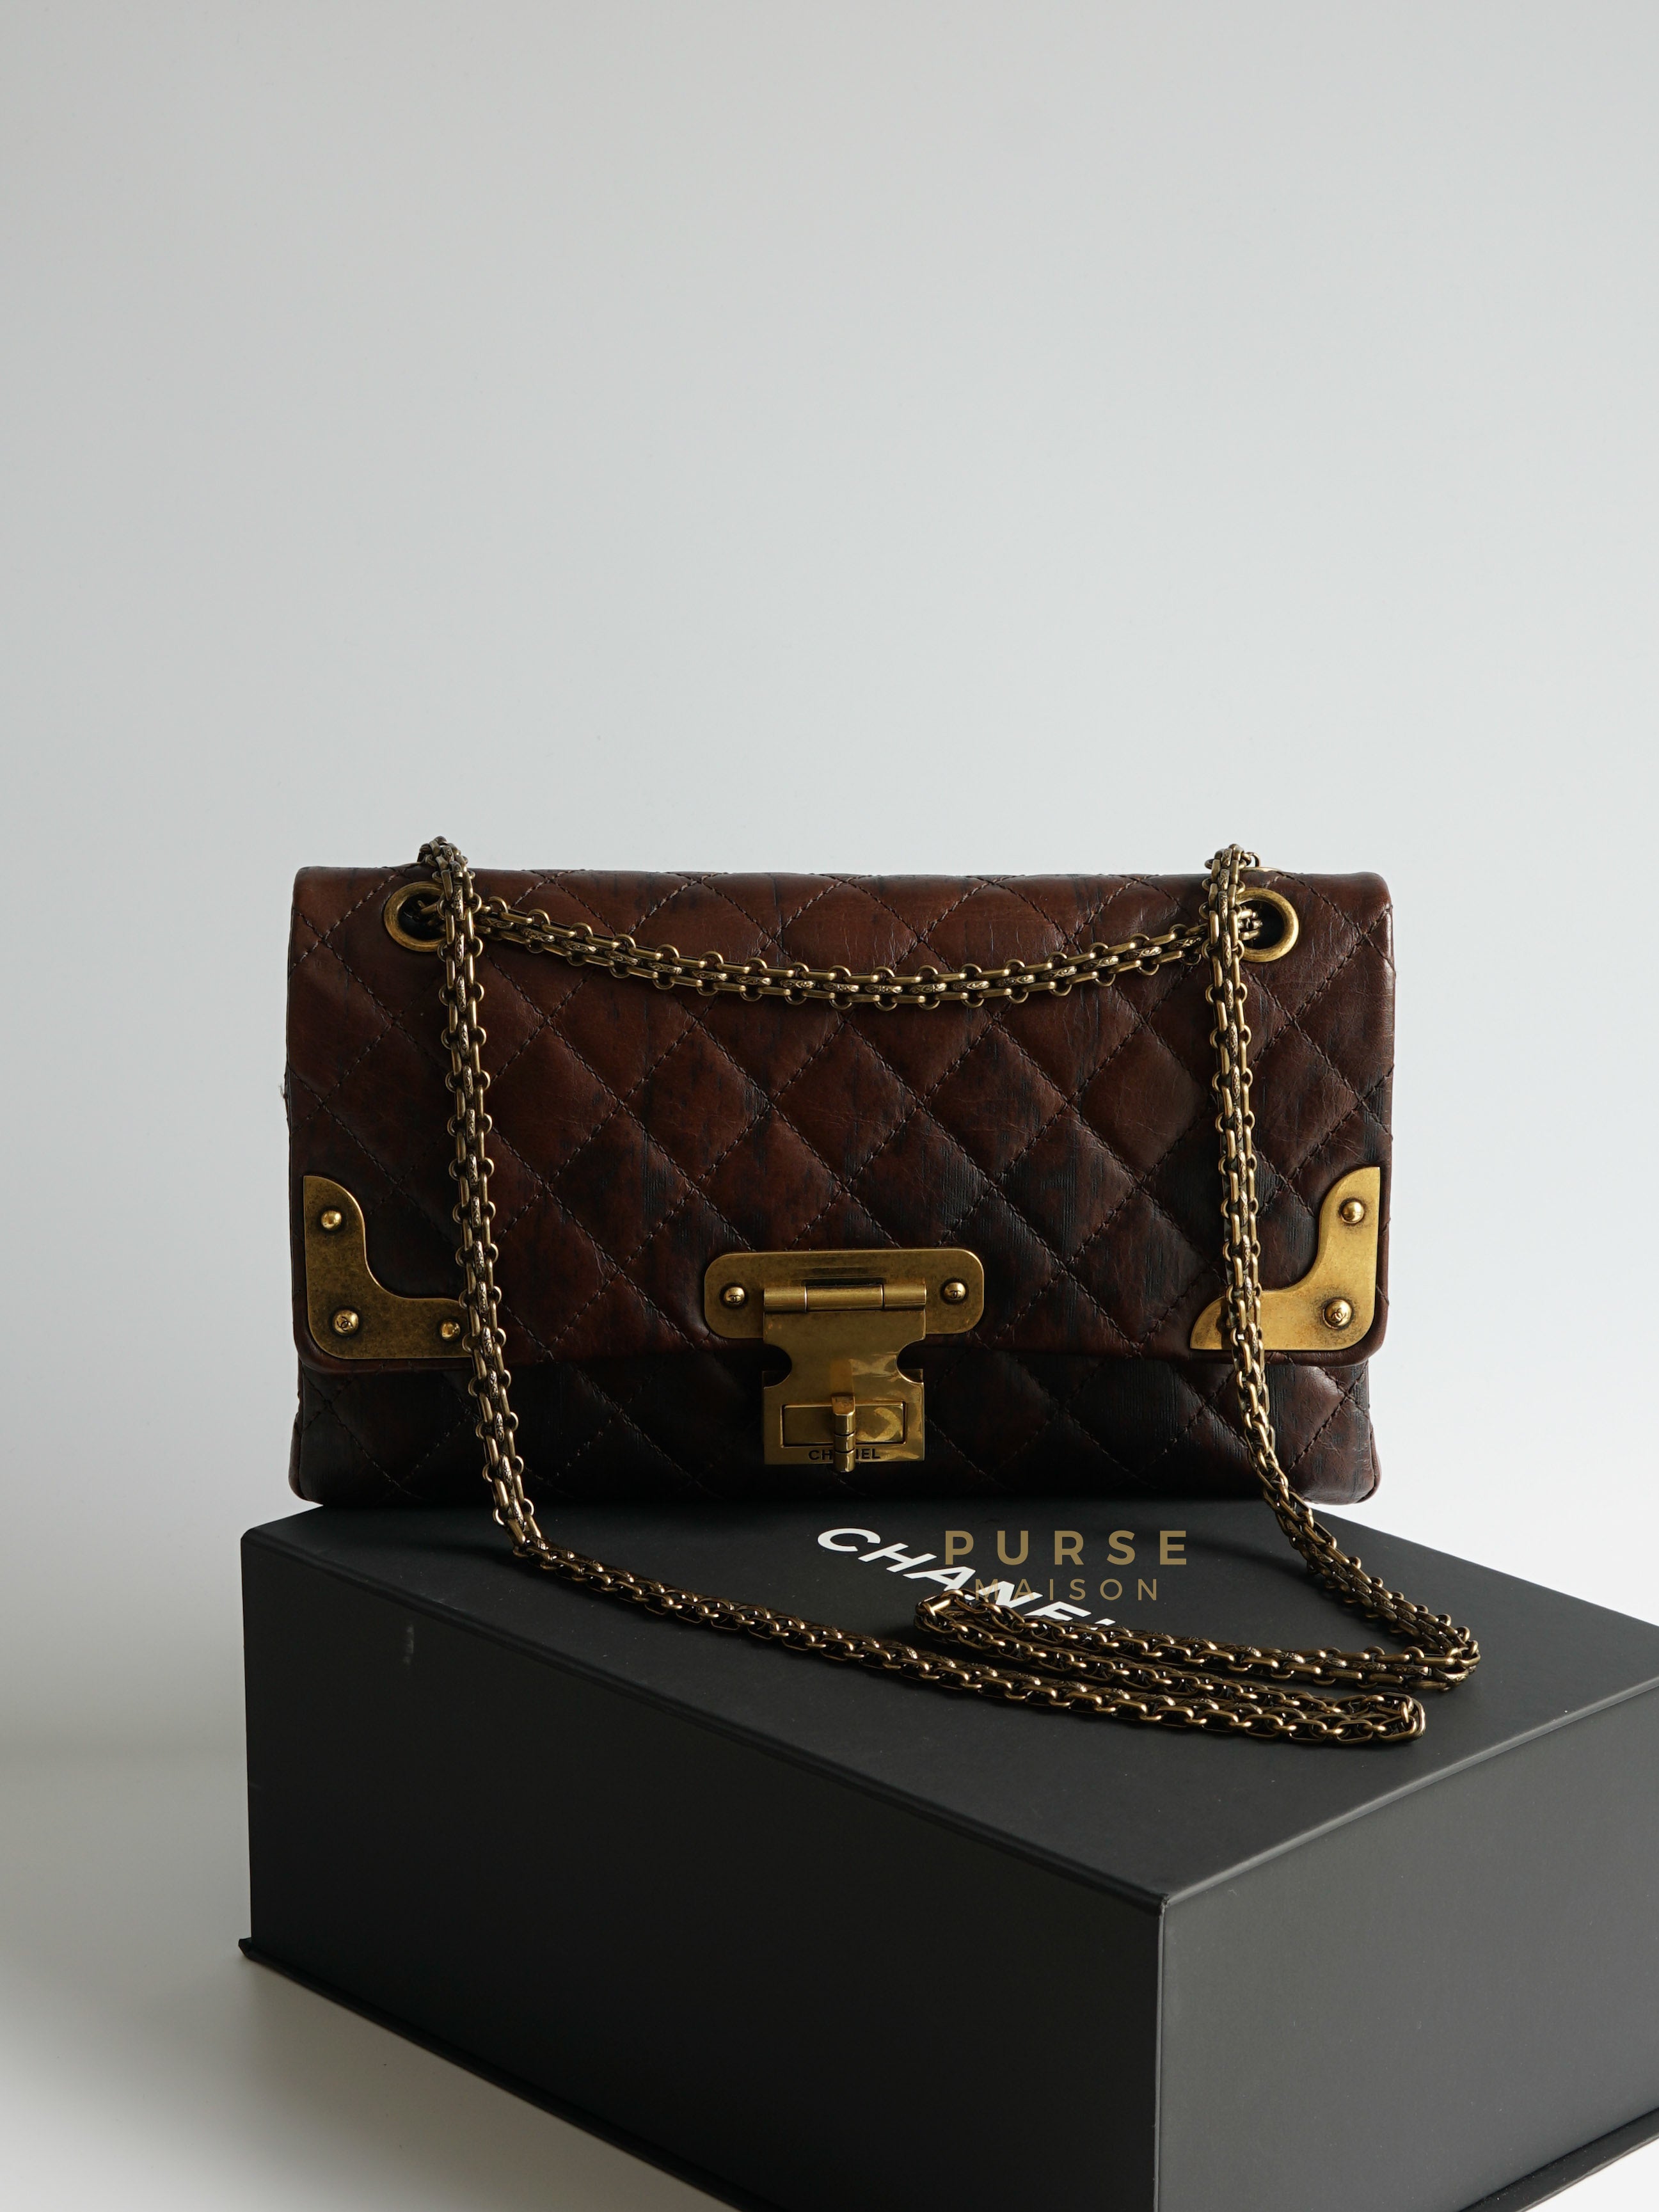 2.55 Reissue Limited Edition in Brown Quilted Aged Calfskin Bag Series 13 | Purse Maison Luxury Bags Shop